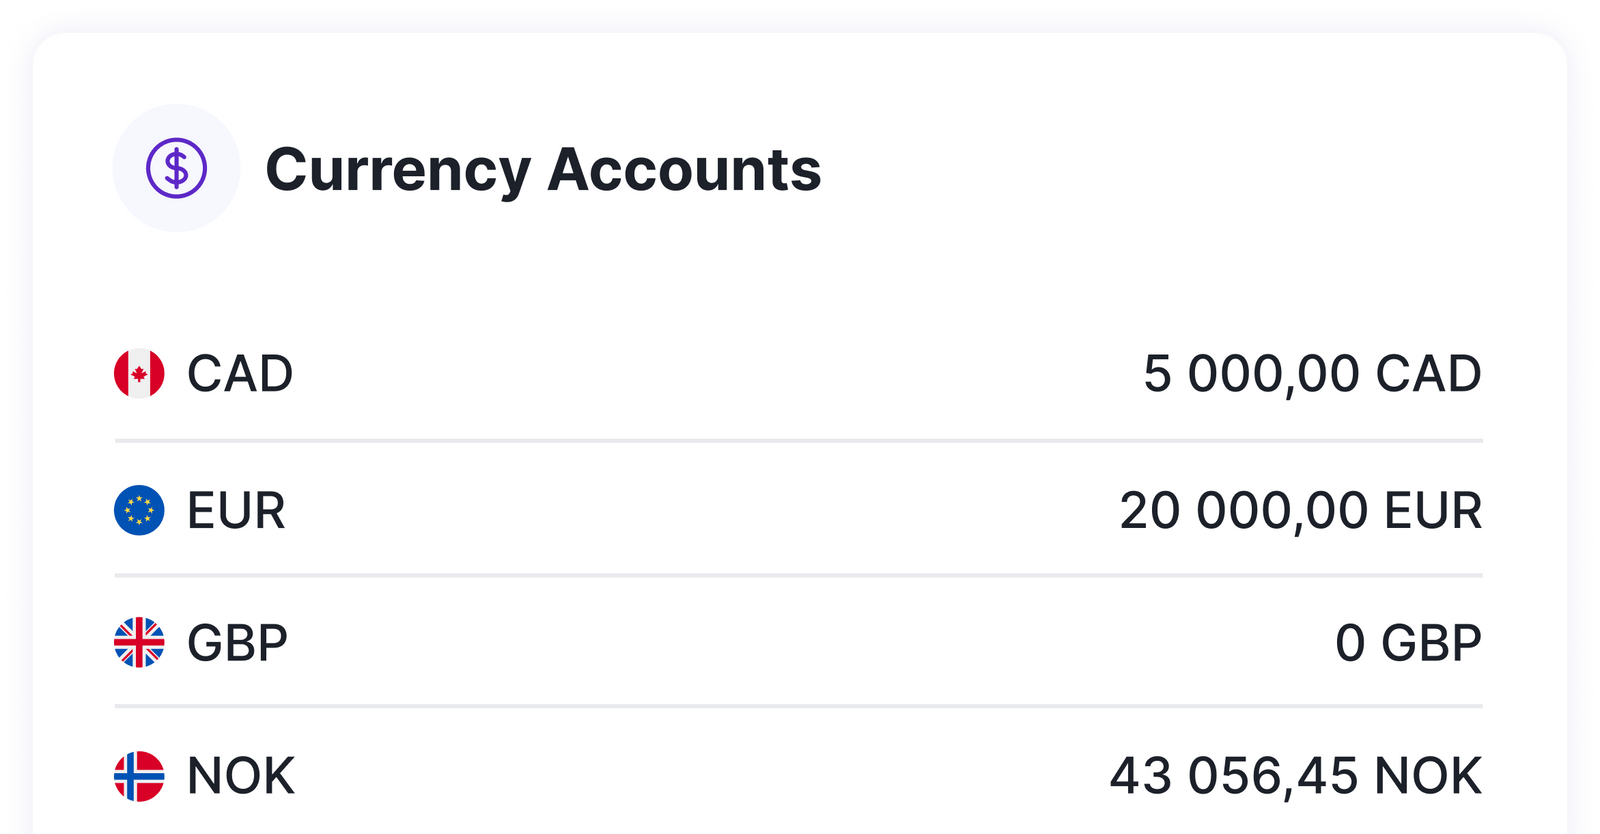 Currency accounts